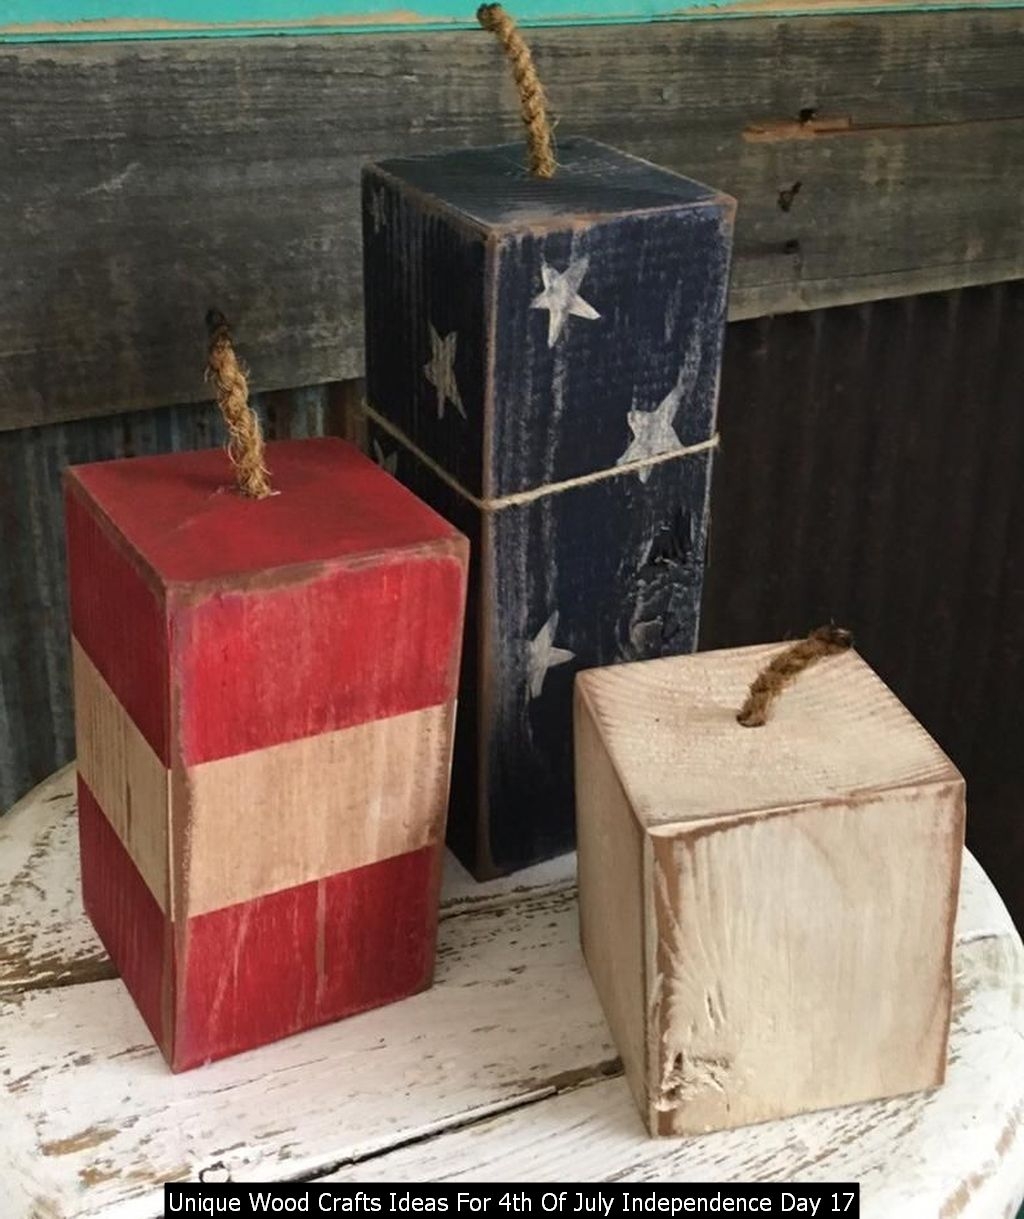 Unique Wood Crafts Ideas For 4th Of July Independence Day 17